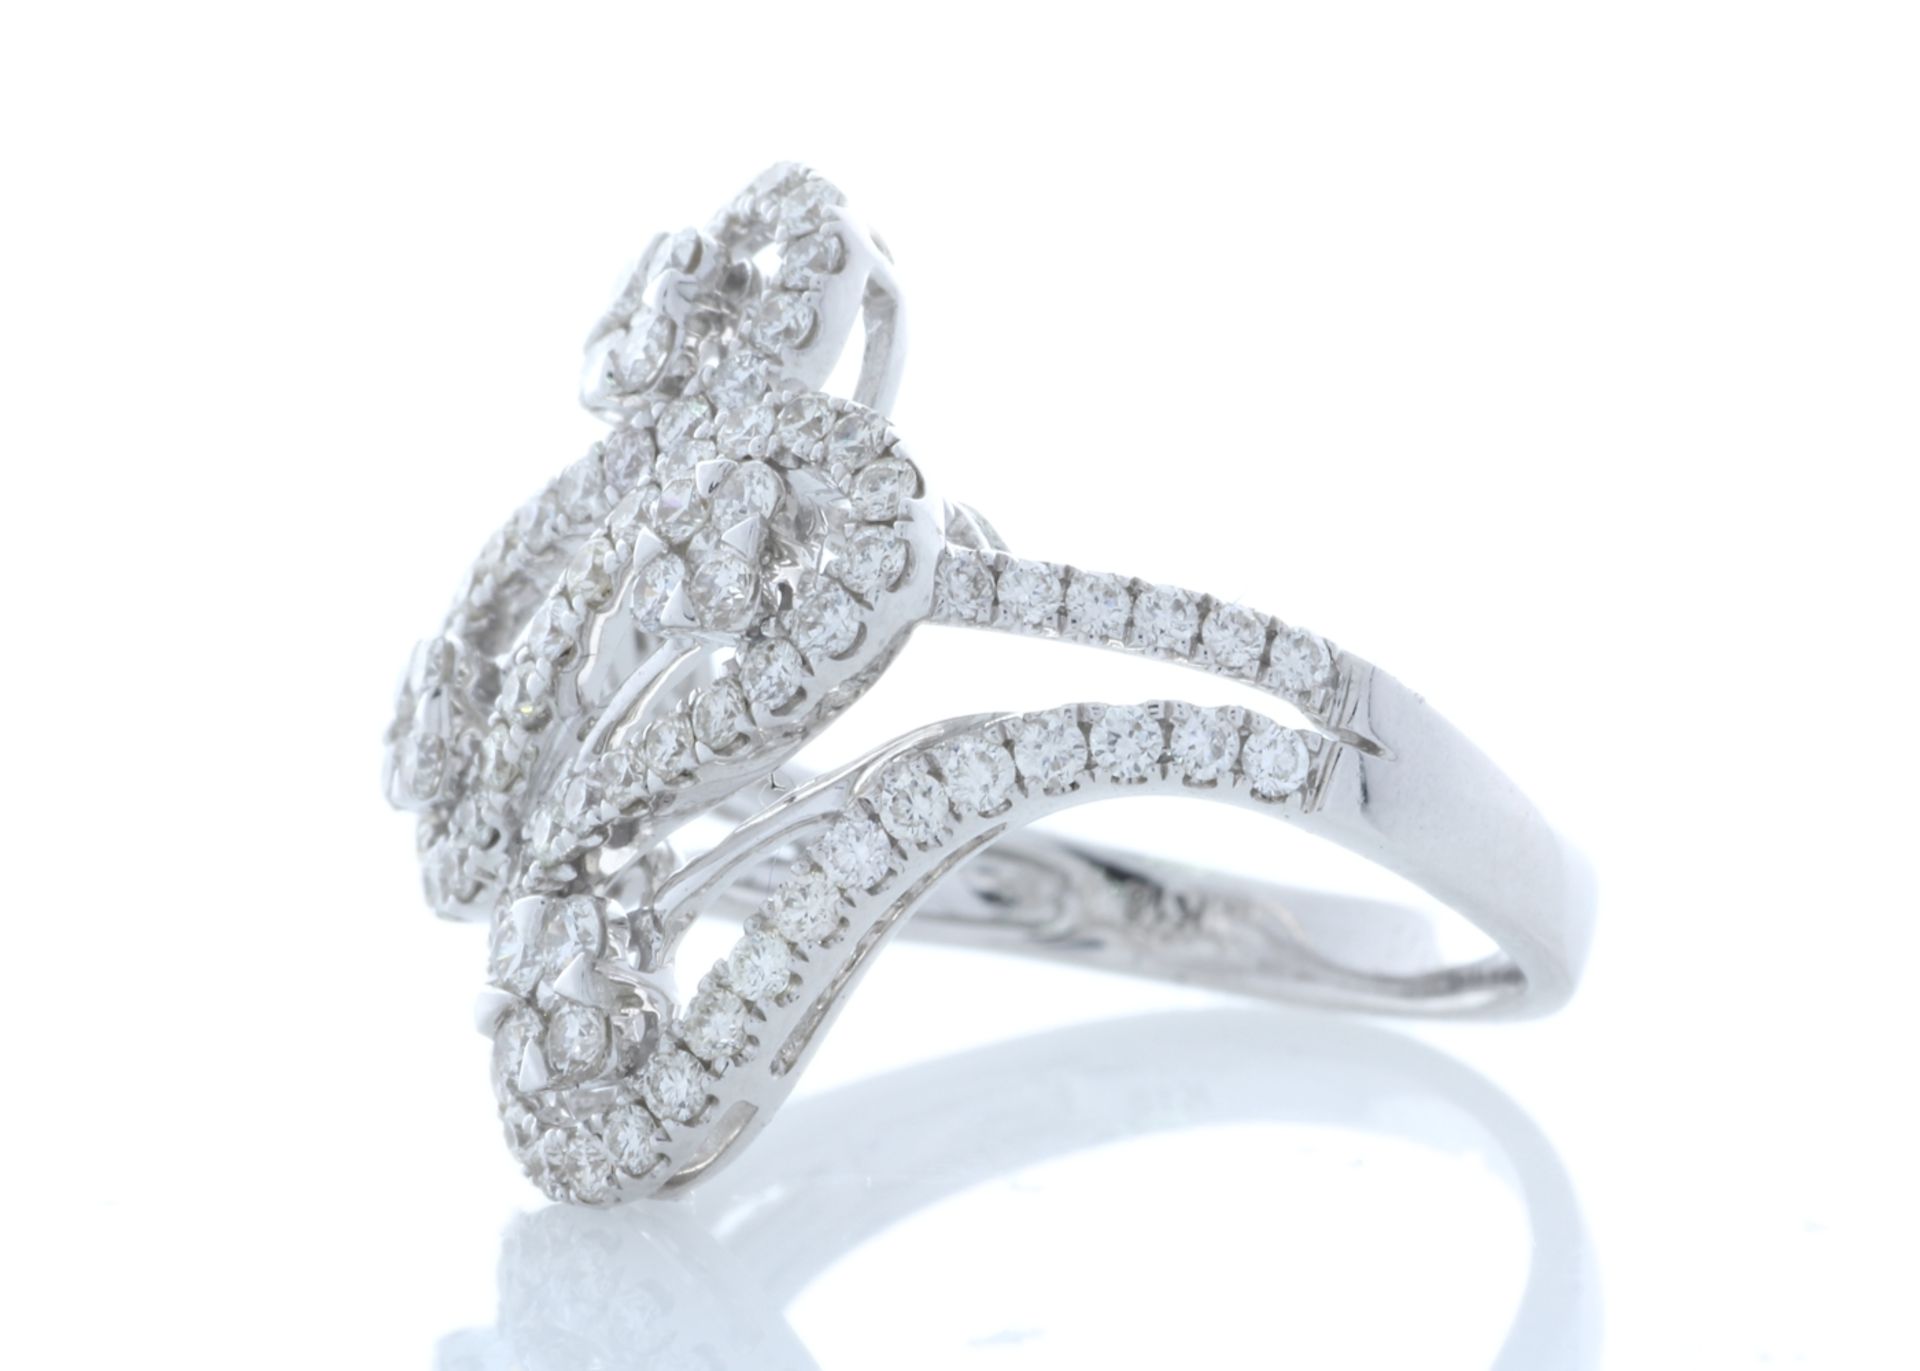 18ct White Gold Fancy Cluster Diamond Ring 1.15 Carats - Valued by GIE £8,000.00 - This stunning - Image 2 of 4